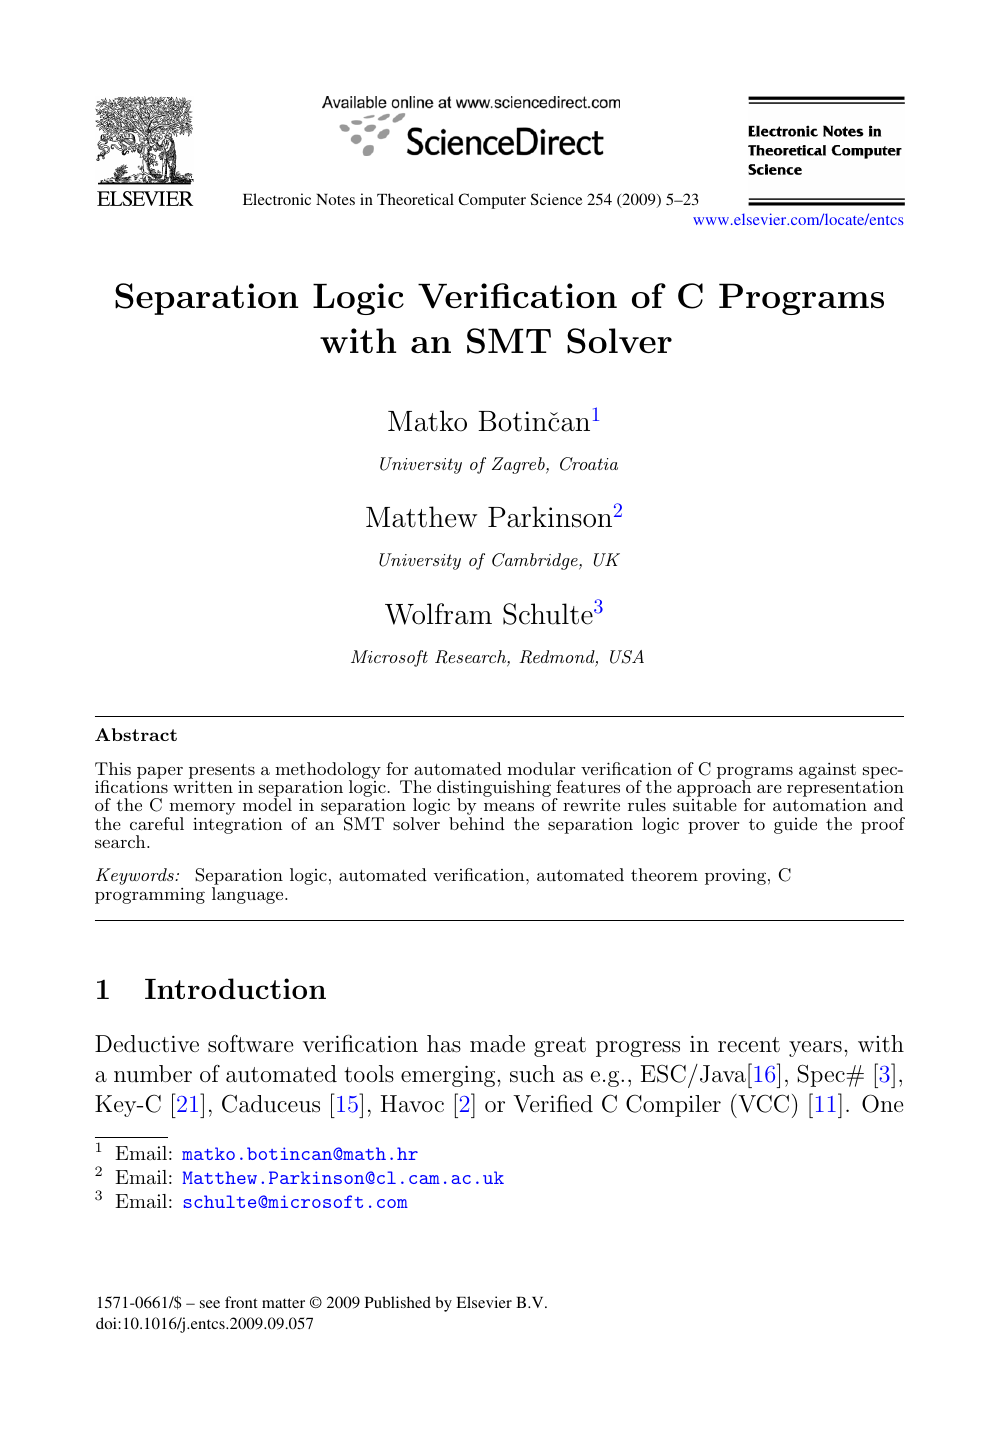 Separation Logic Verification Of C Programs With An Smt Solver Topic Of Research Paper In Computer And Information Sciences Download Scholarly Article Pdf And Read For Free On Cyberleninka Open Science